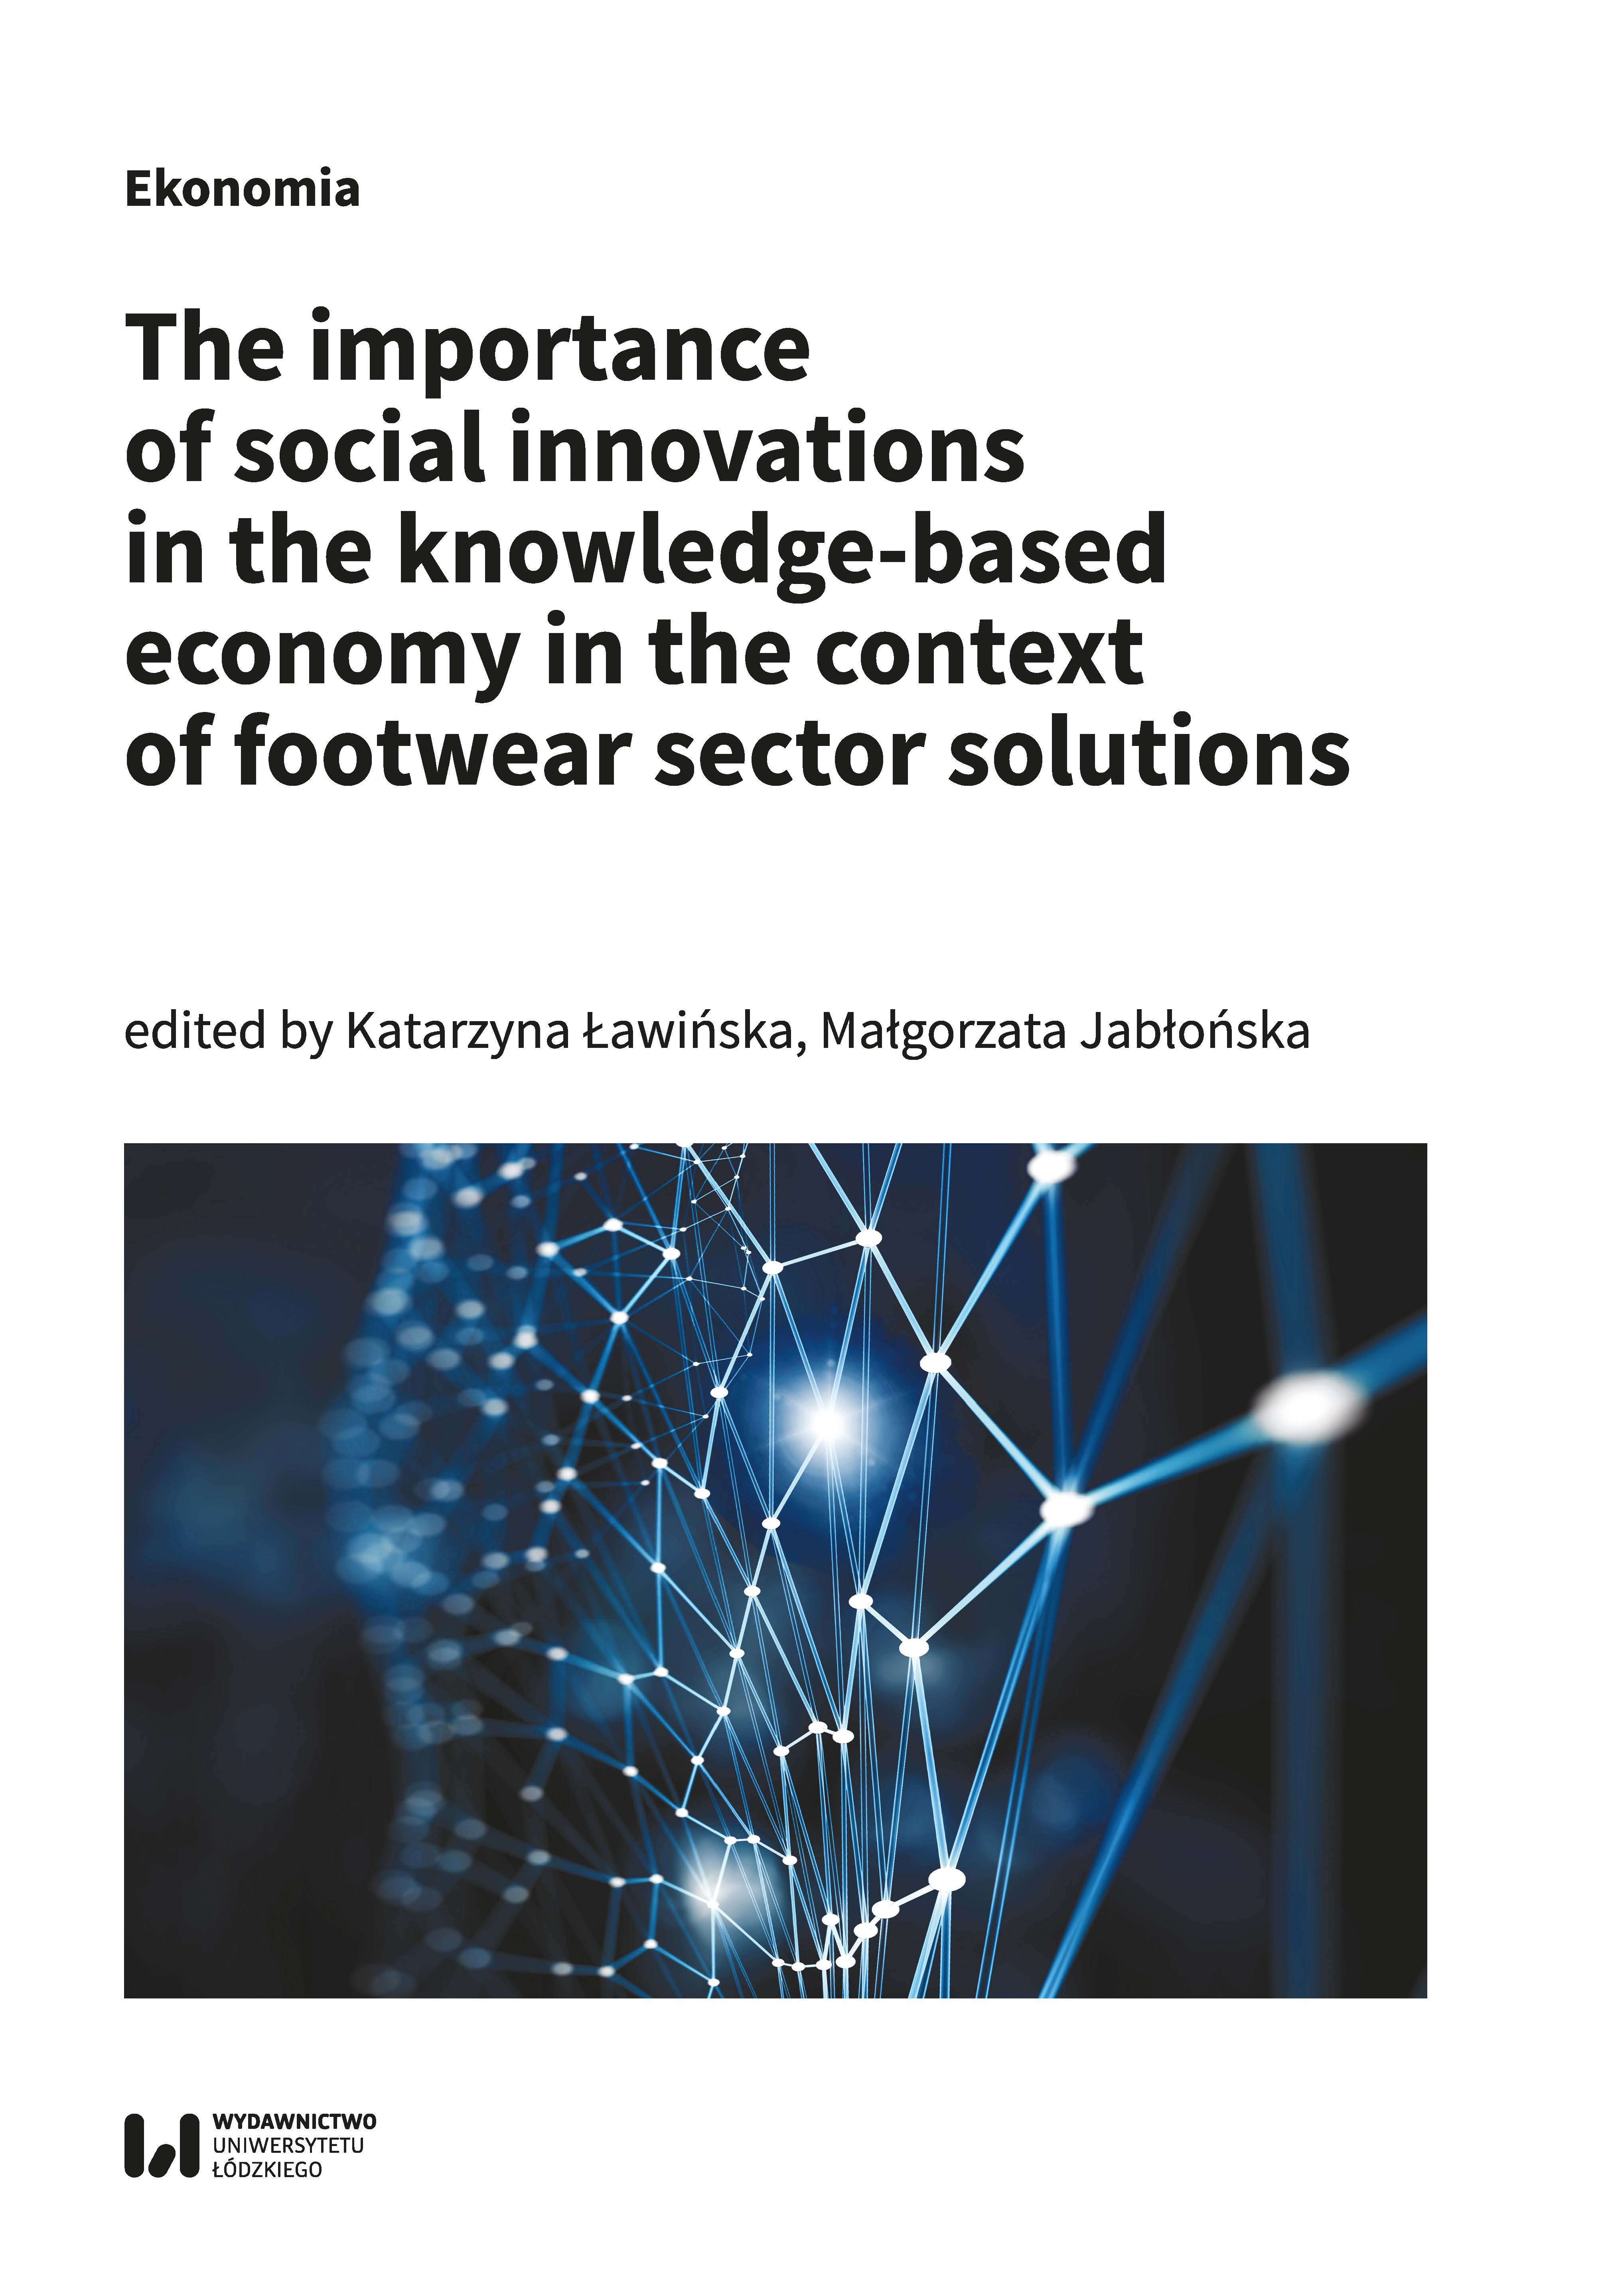 The importance of social innovations in the knowledge-based economy in the context of footwear sector solutions